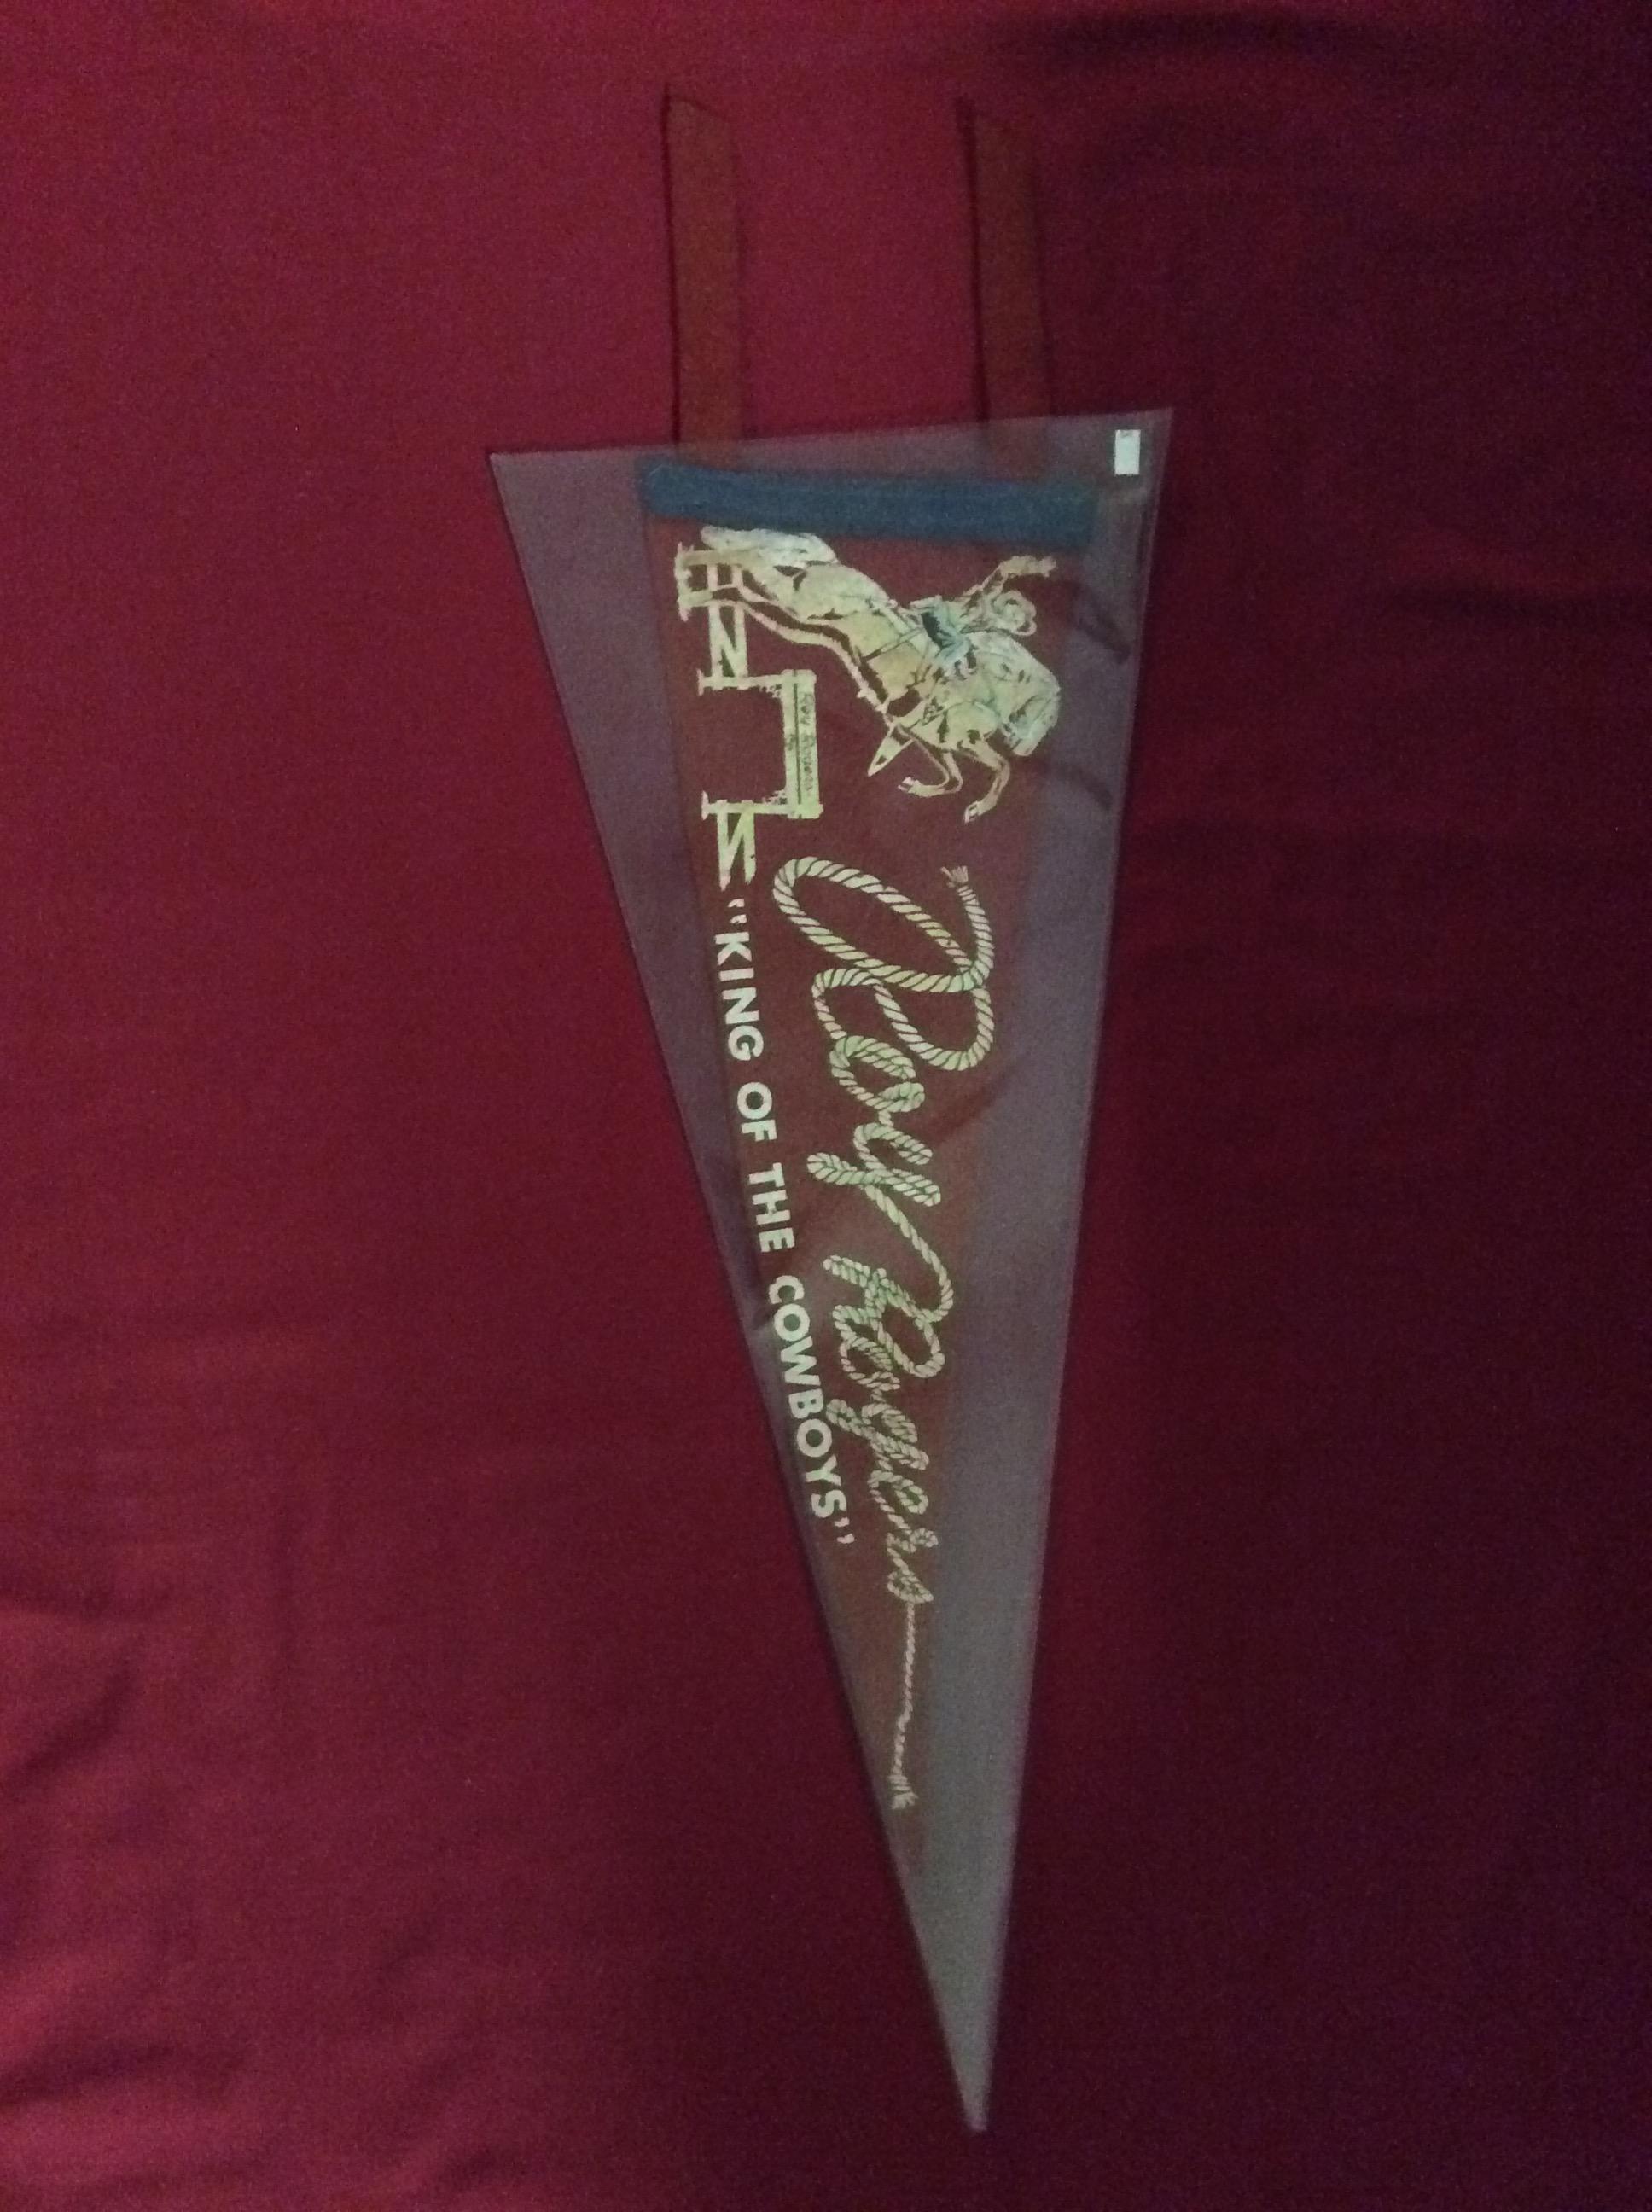 Roy Rogers "King of the Cowboys Pennant